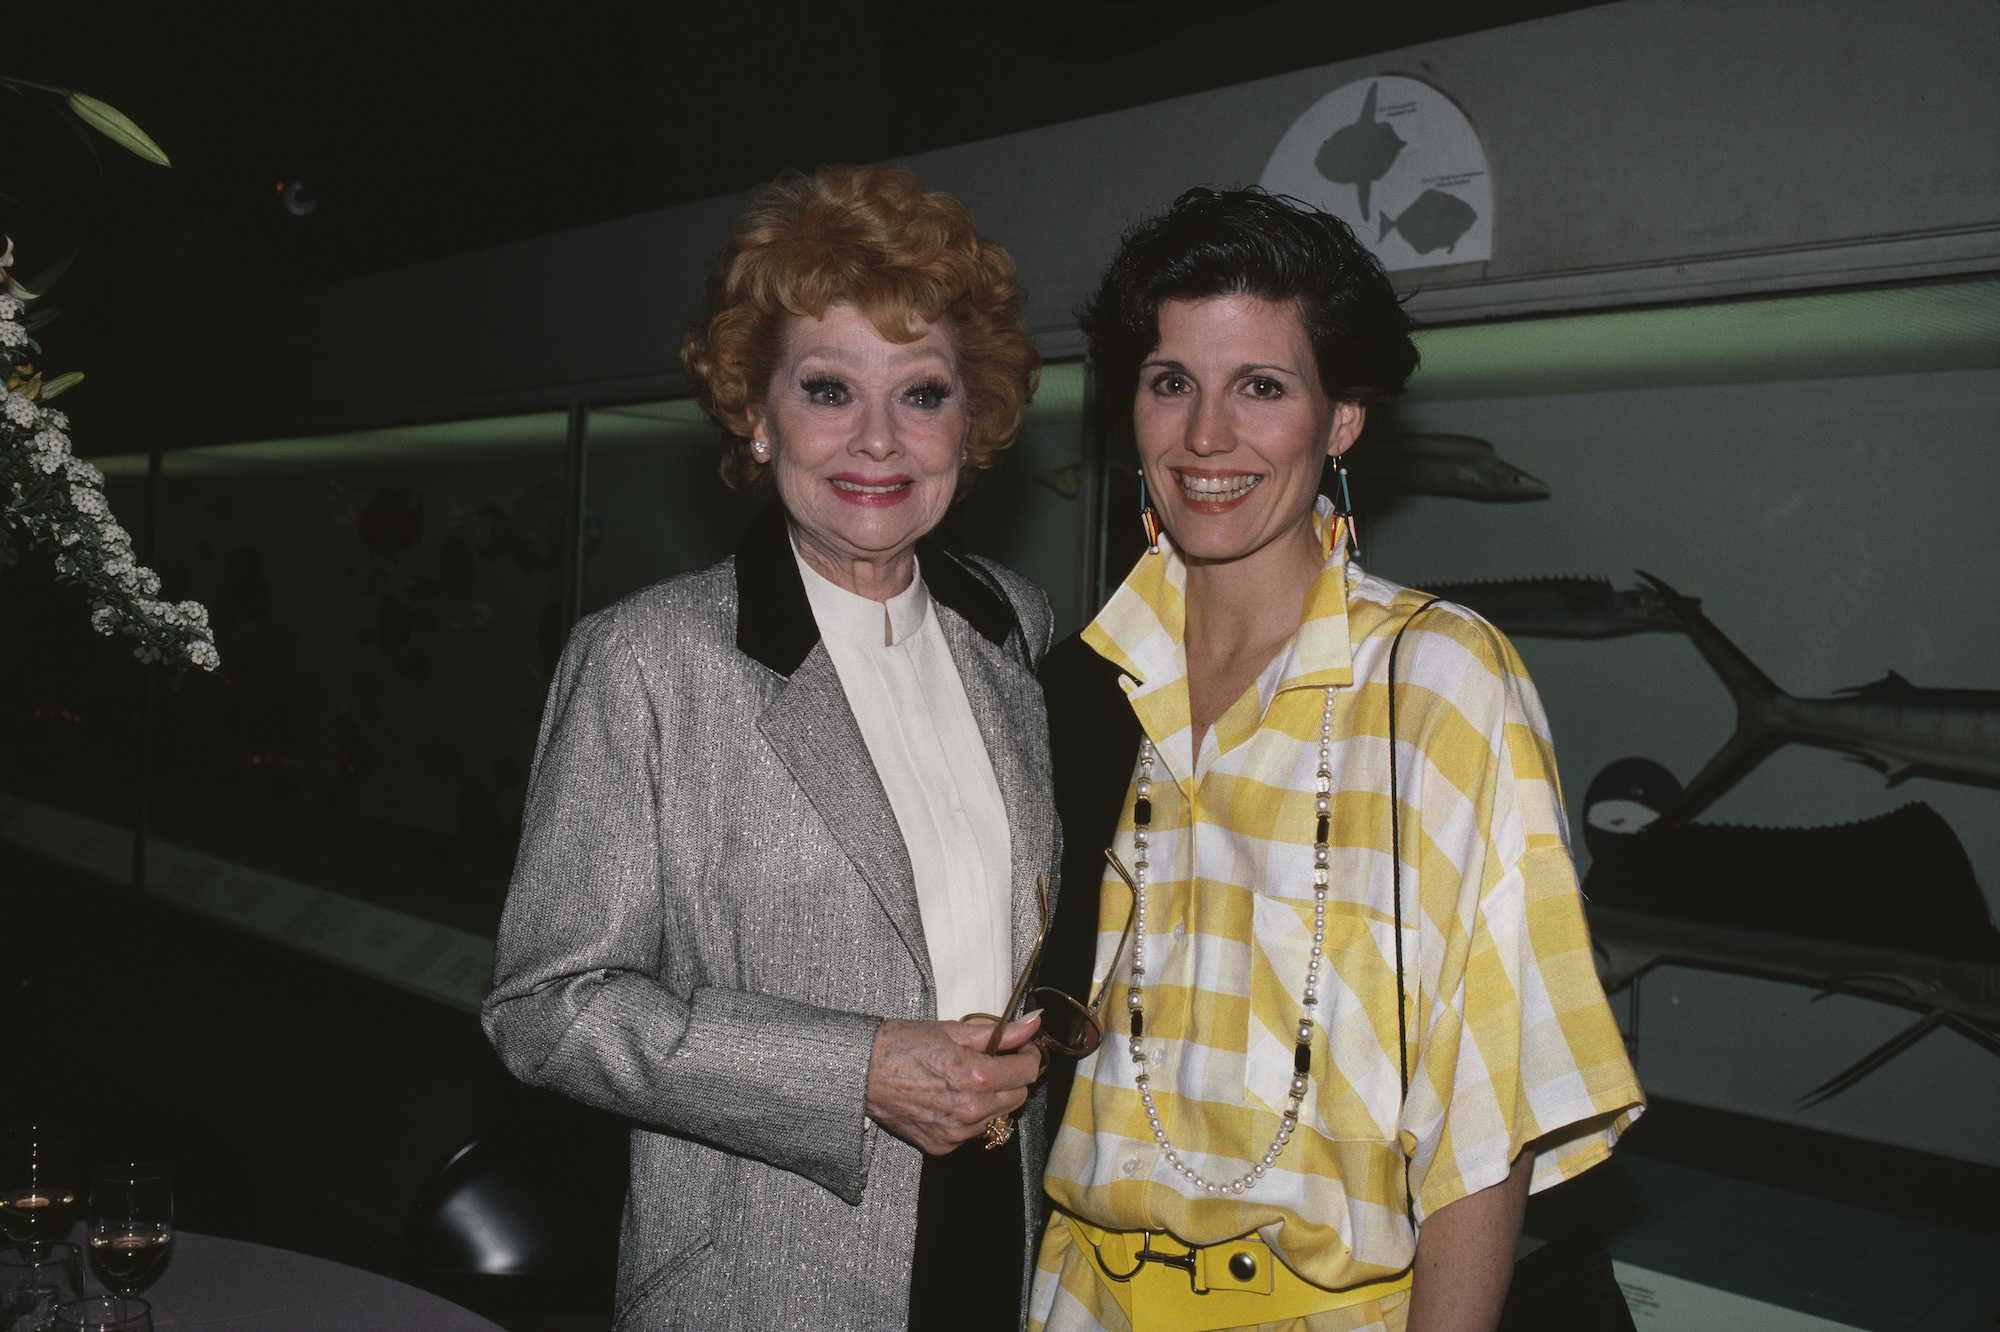 Lucille Ball and her daughter Lucie Arnez attending an event in 1986